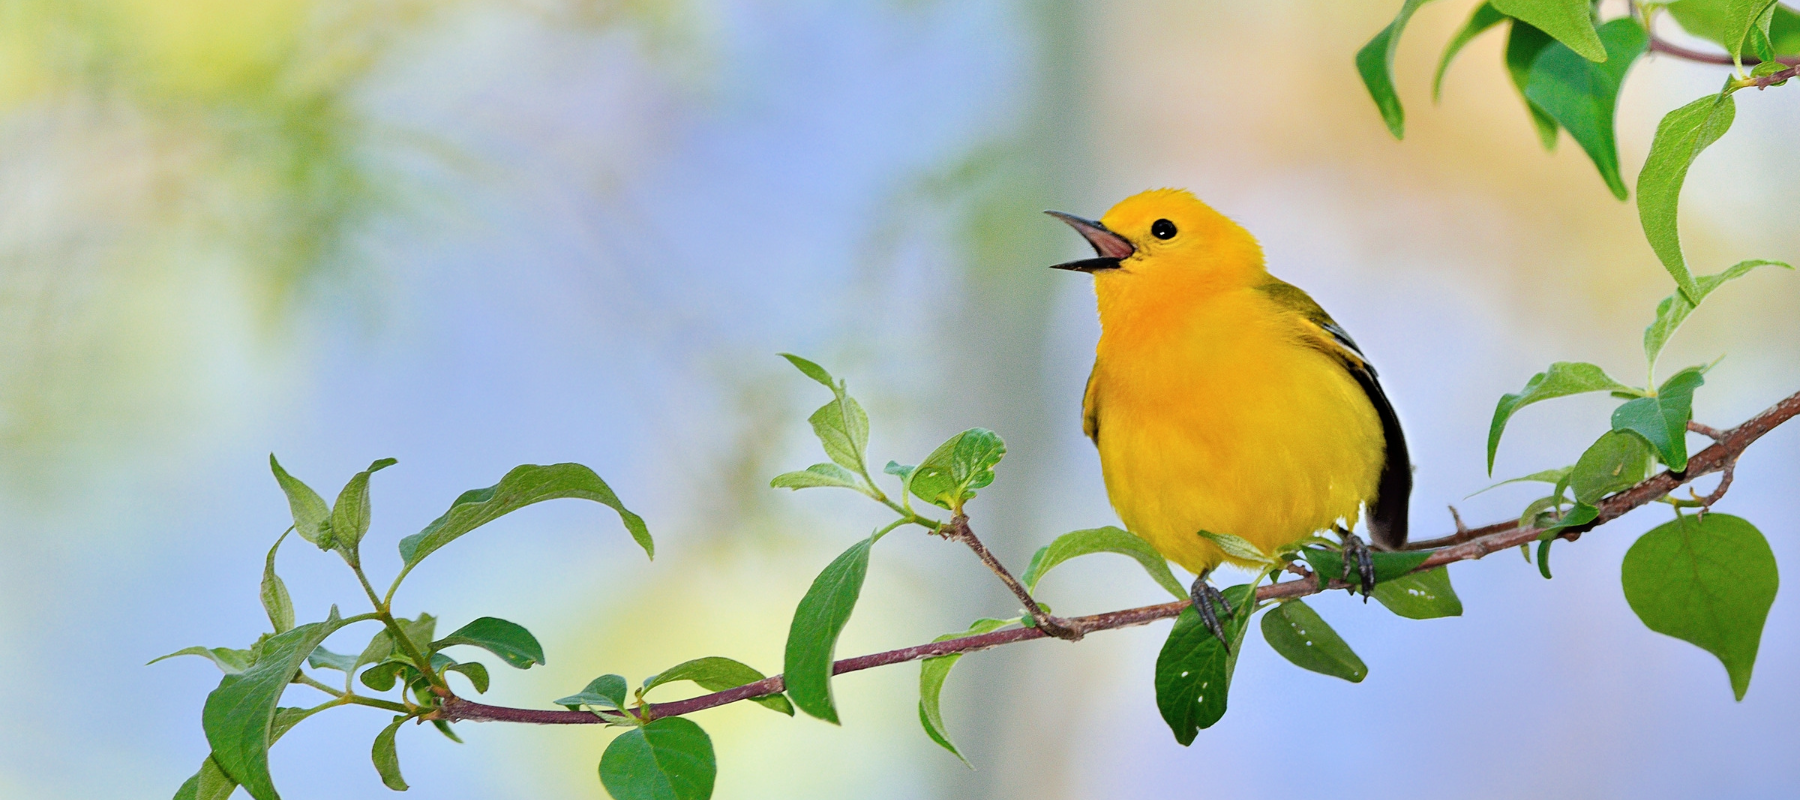 A Complete Guide to Attracting Warblers to Your Backyard